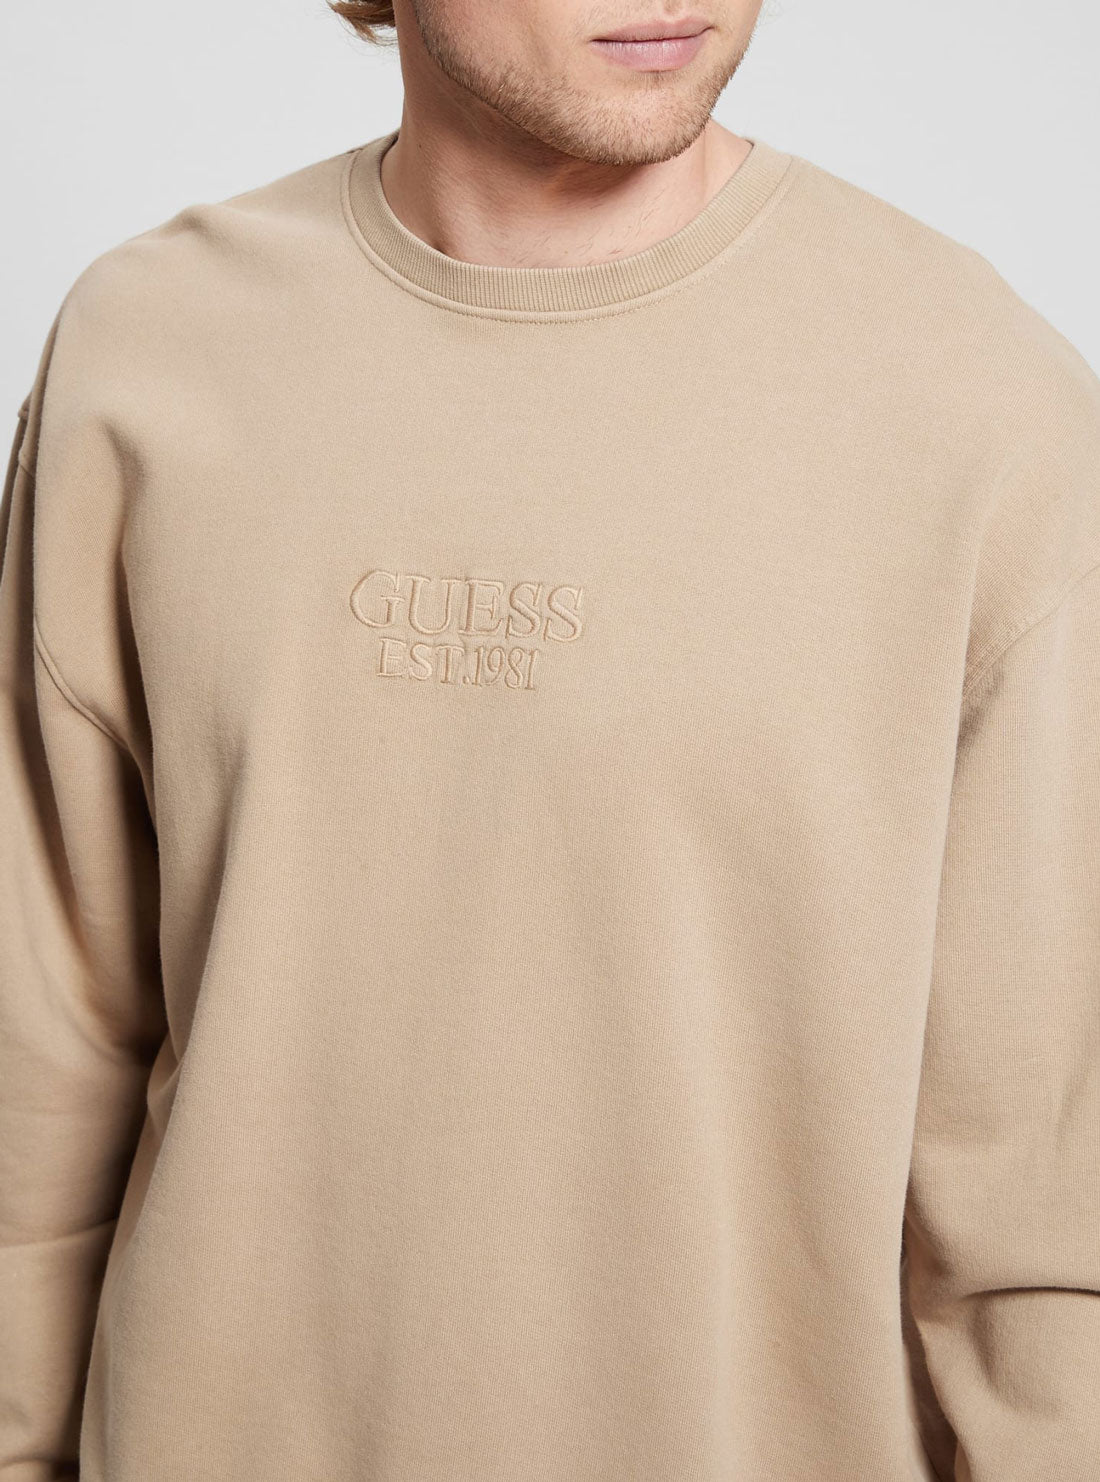 GUESS Beige French Vintage Jumper detail view